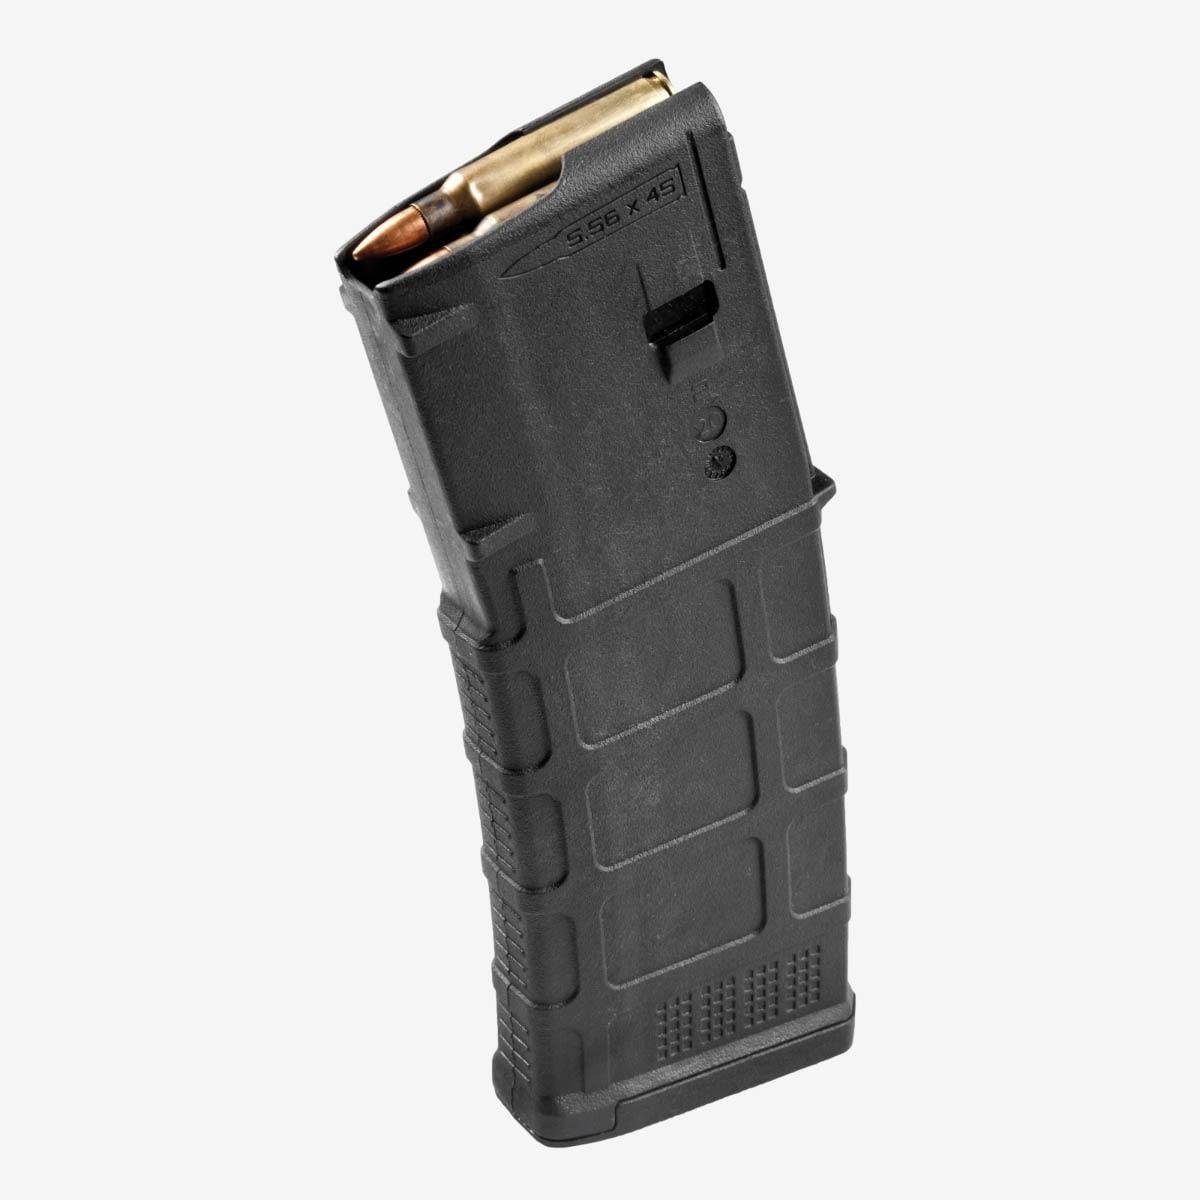 Magpul PMAG M3 5.56 NATO / .223 Rem 10-Rounds with 30 Round Body 5.56x45mm NATO